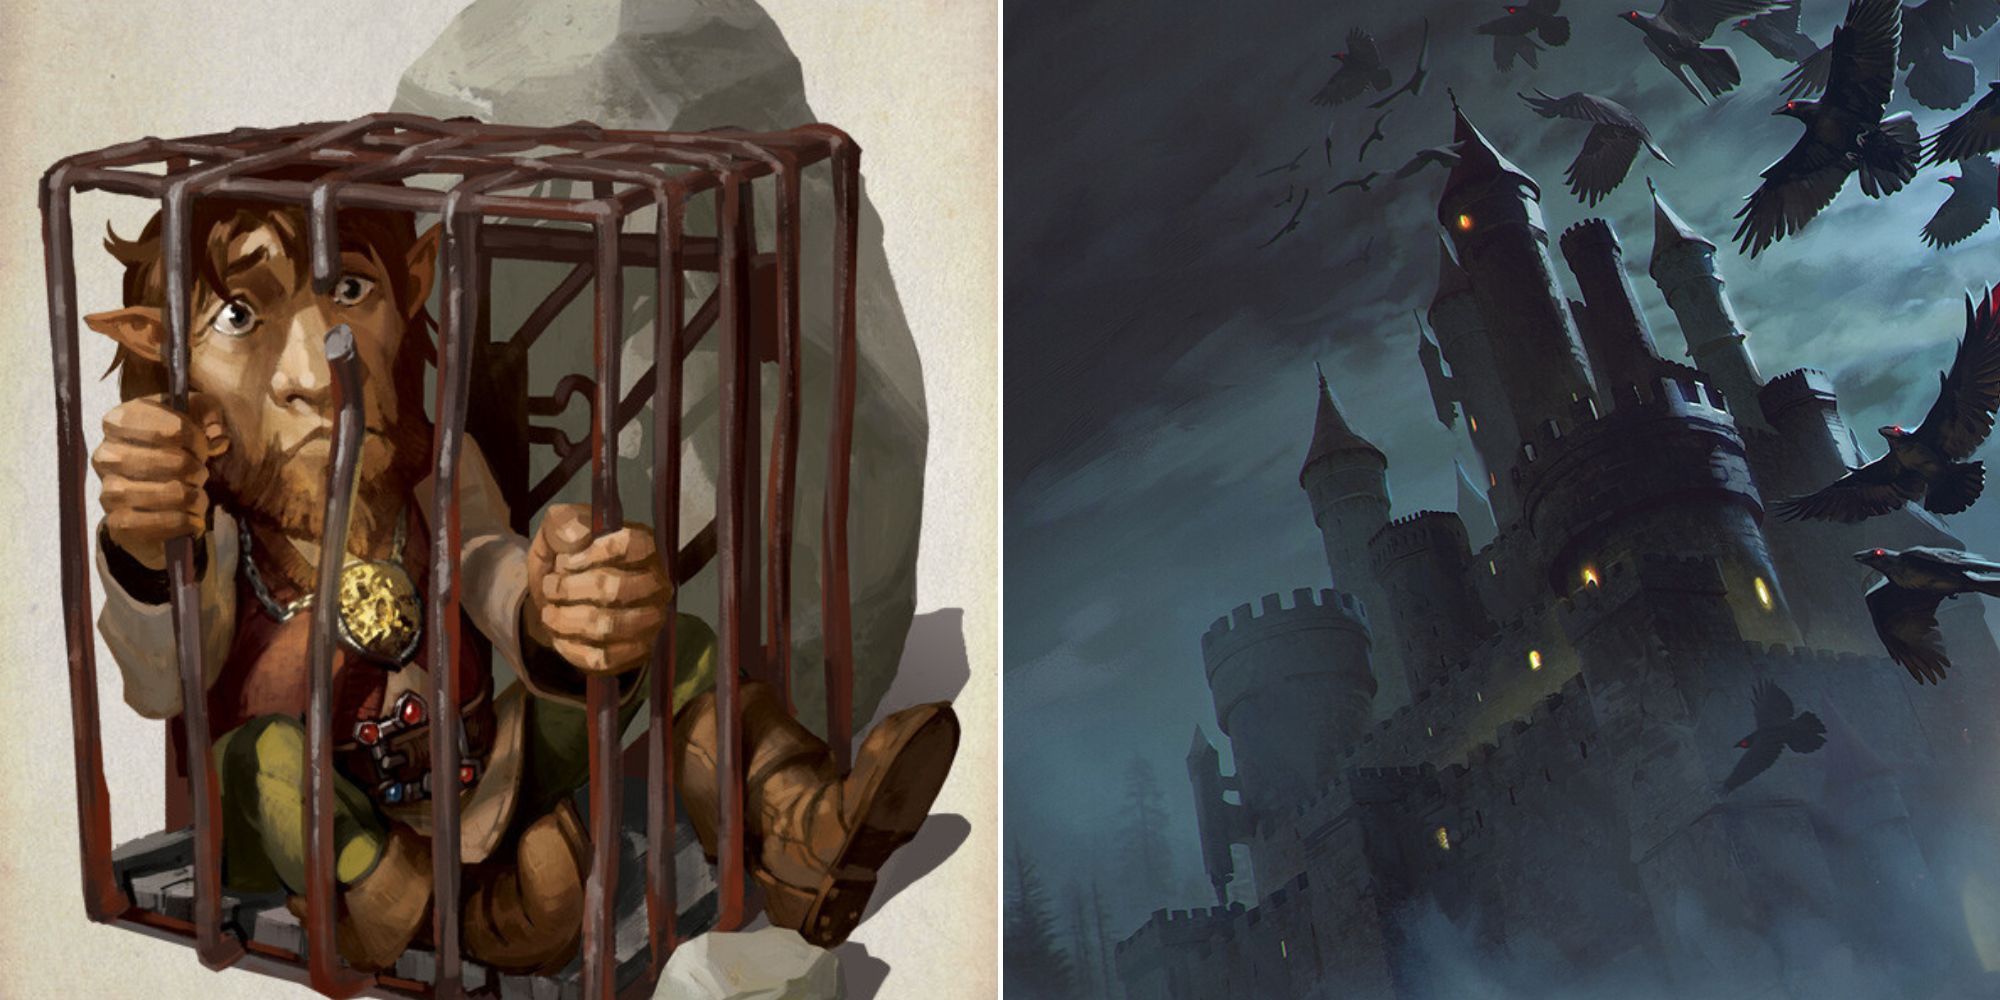 D&D Artwork of Erky Timbers trapped in a cage - Castle Ravenloft with ravens fying past